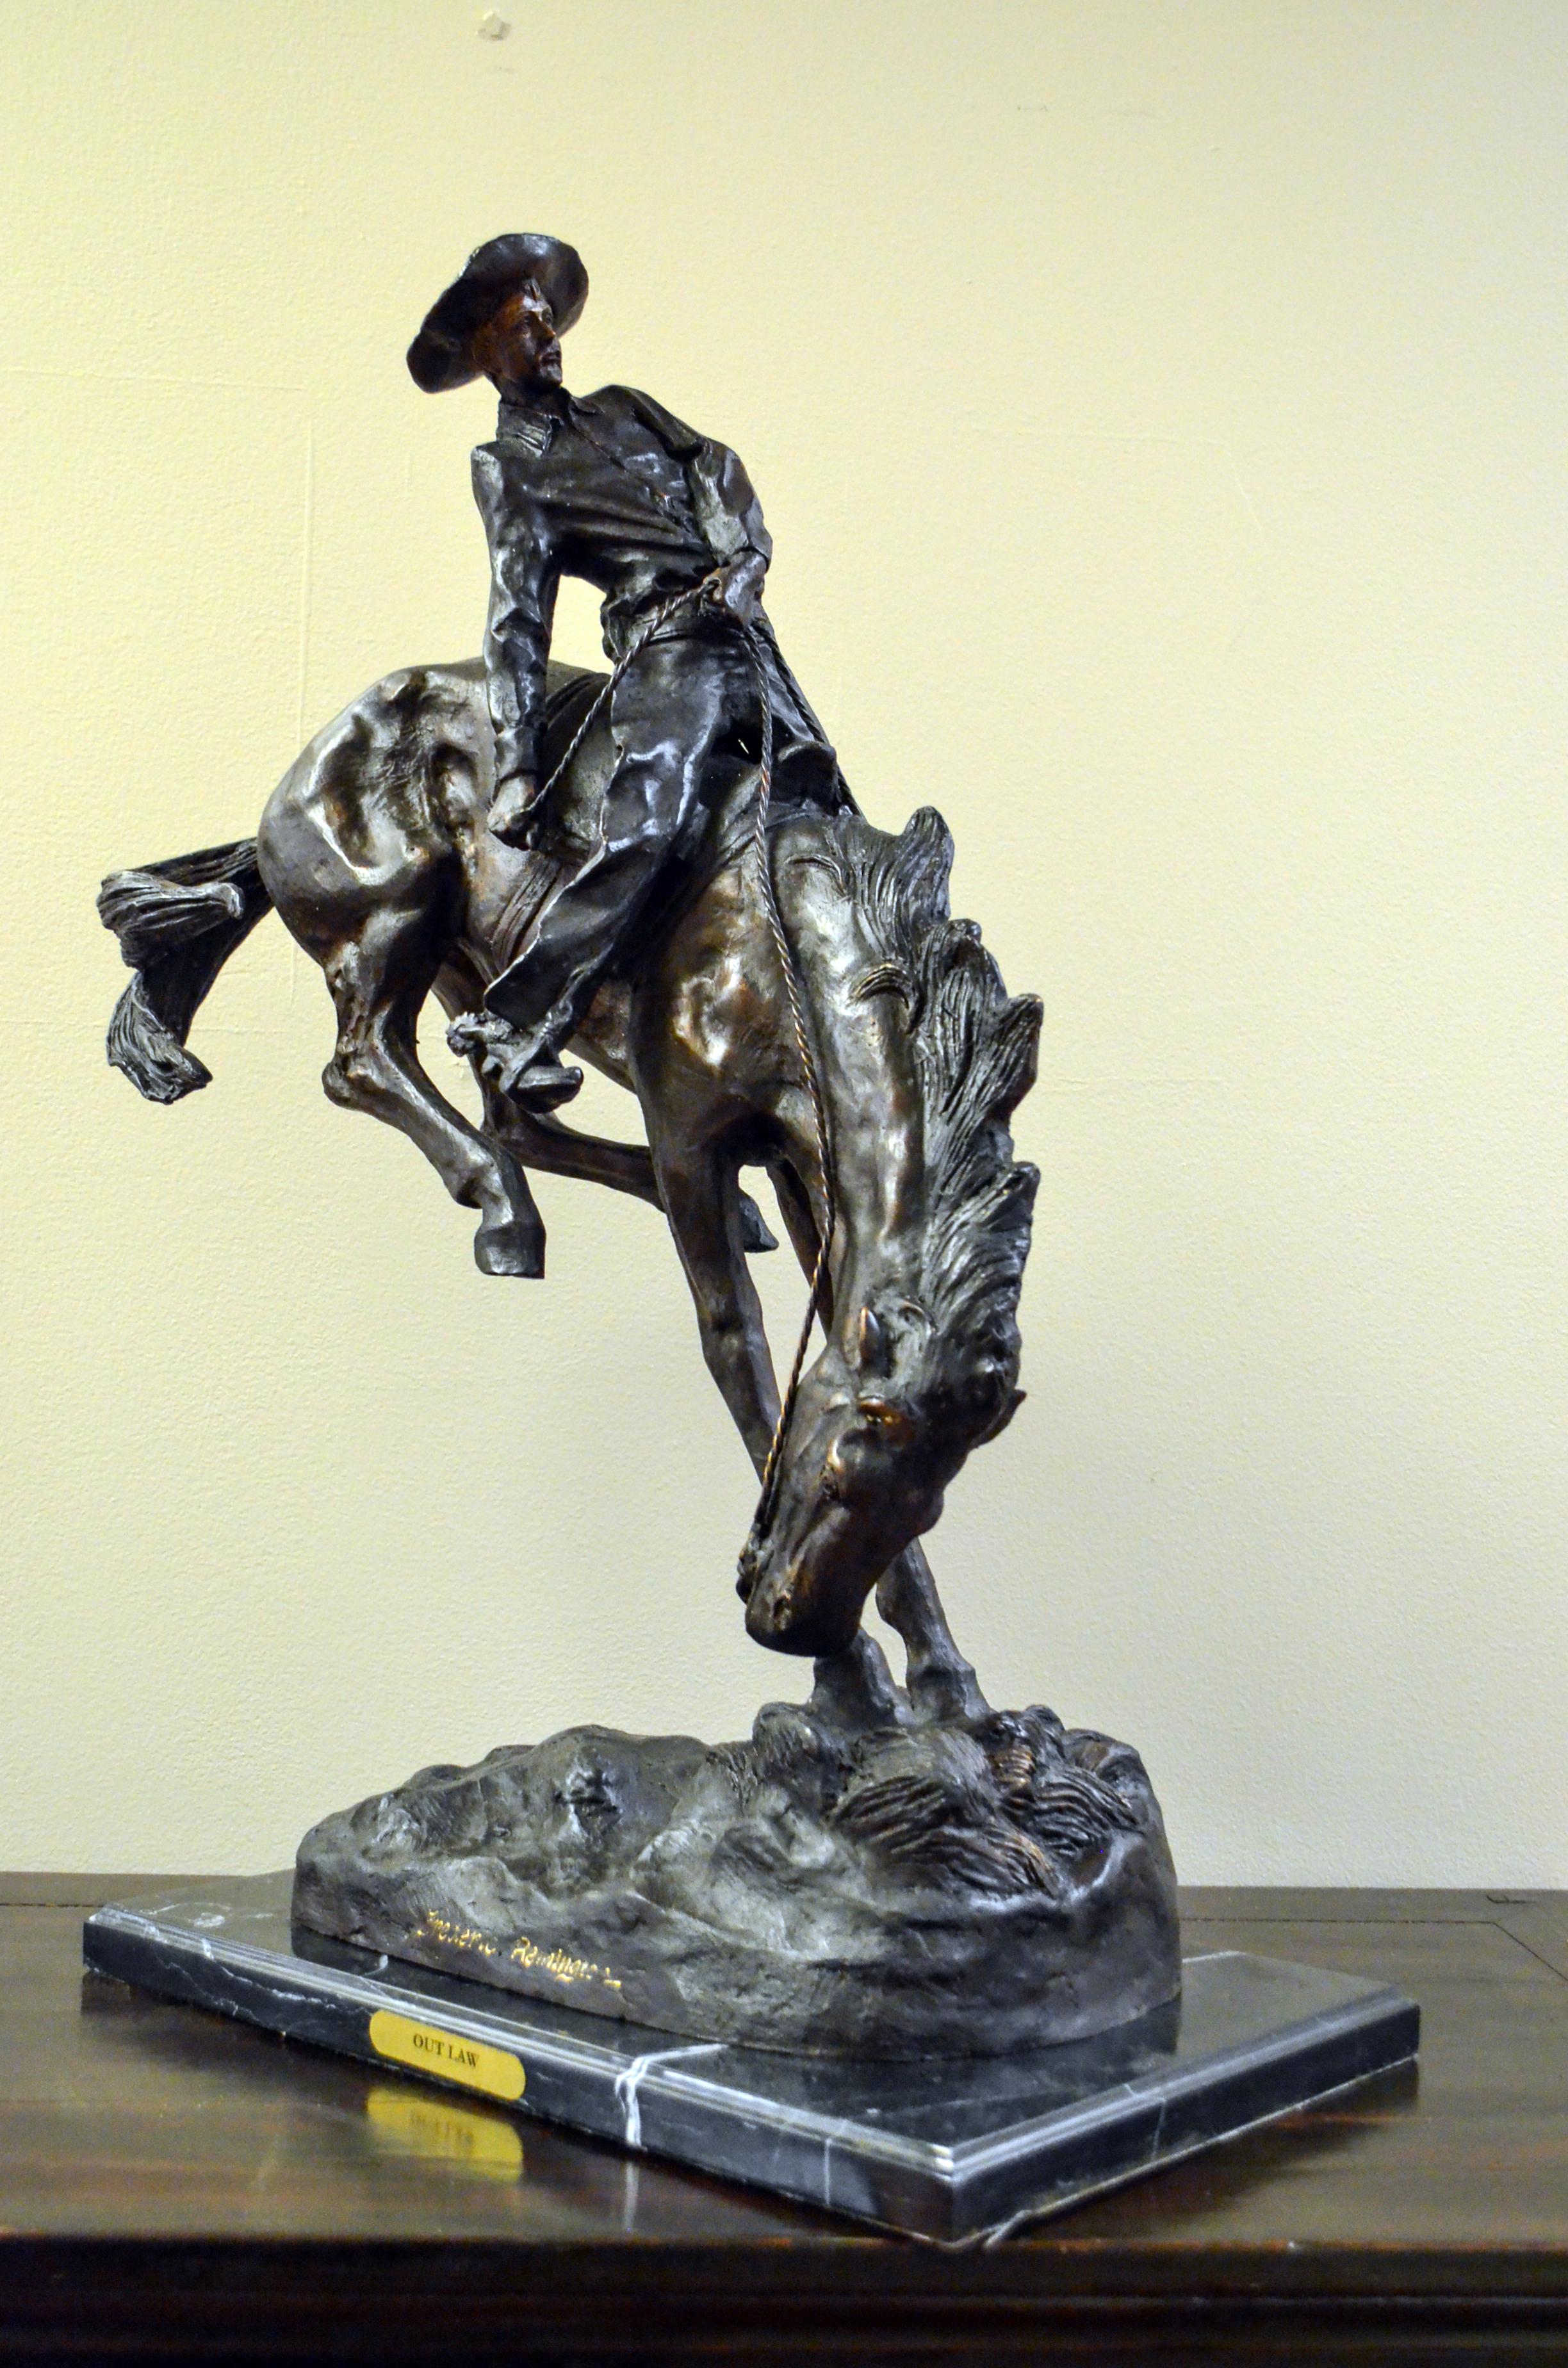 Outlaw, a cast bronze sculpture after American artist Frederic Remington's 1906 original, on marble base. Filled with a tremendous dramatic tension, this bronze sculpture depicts a scene from the American Old West particularly dear to Frederic